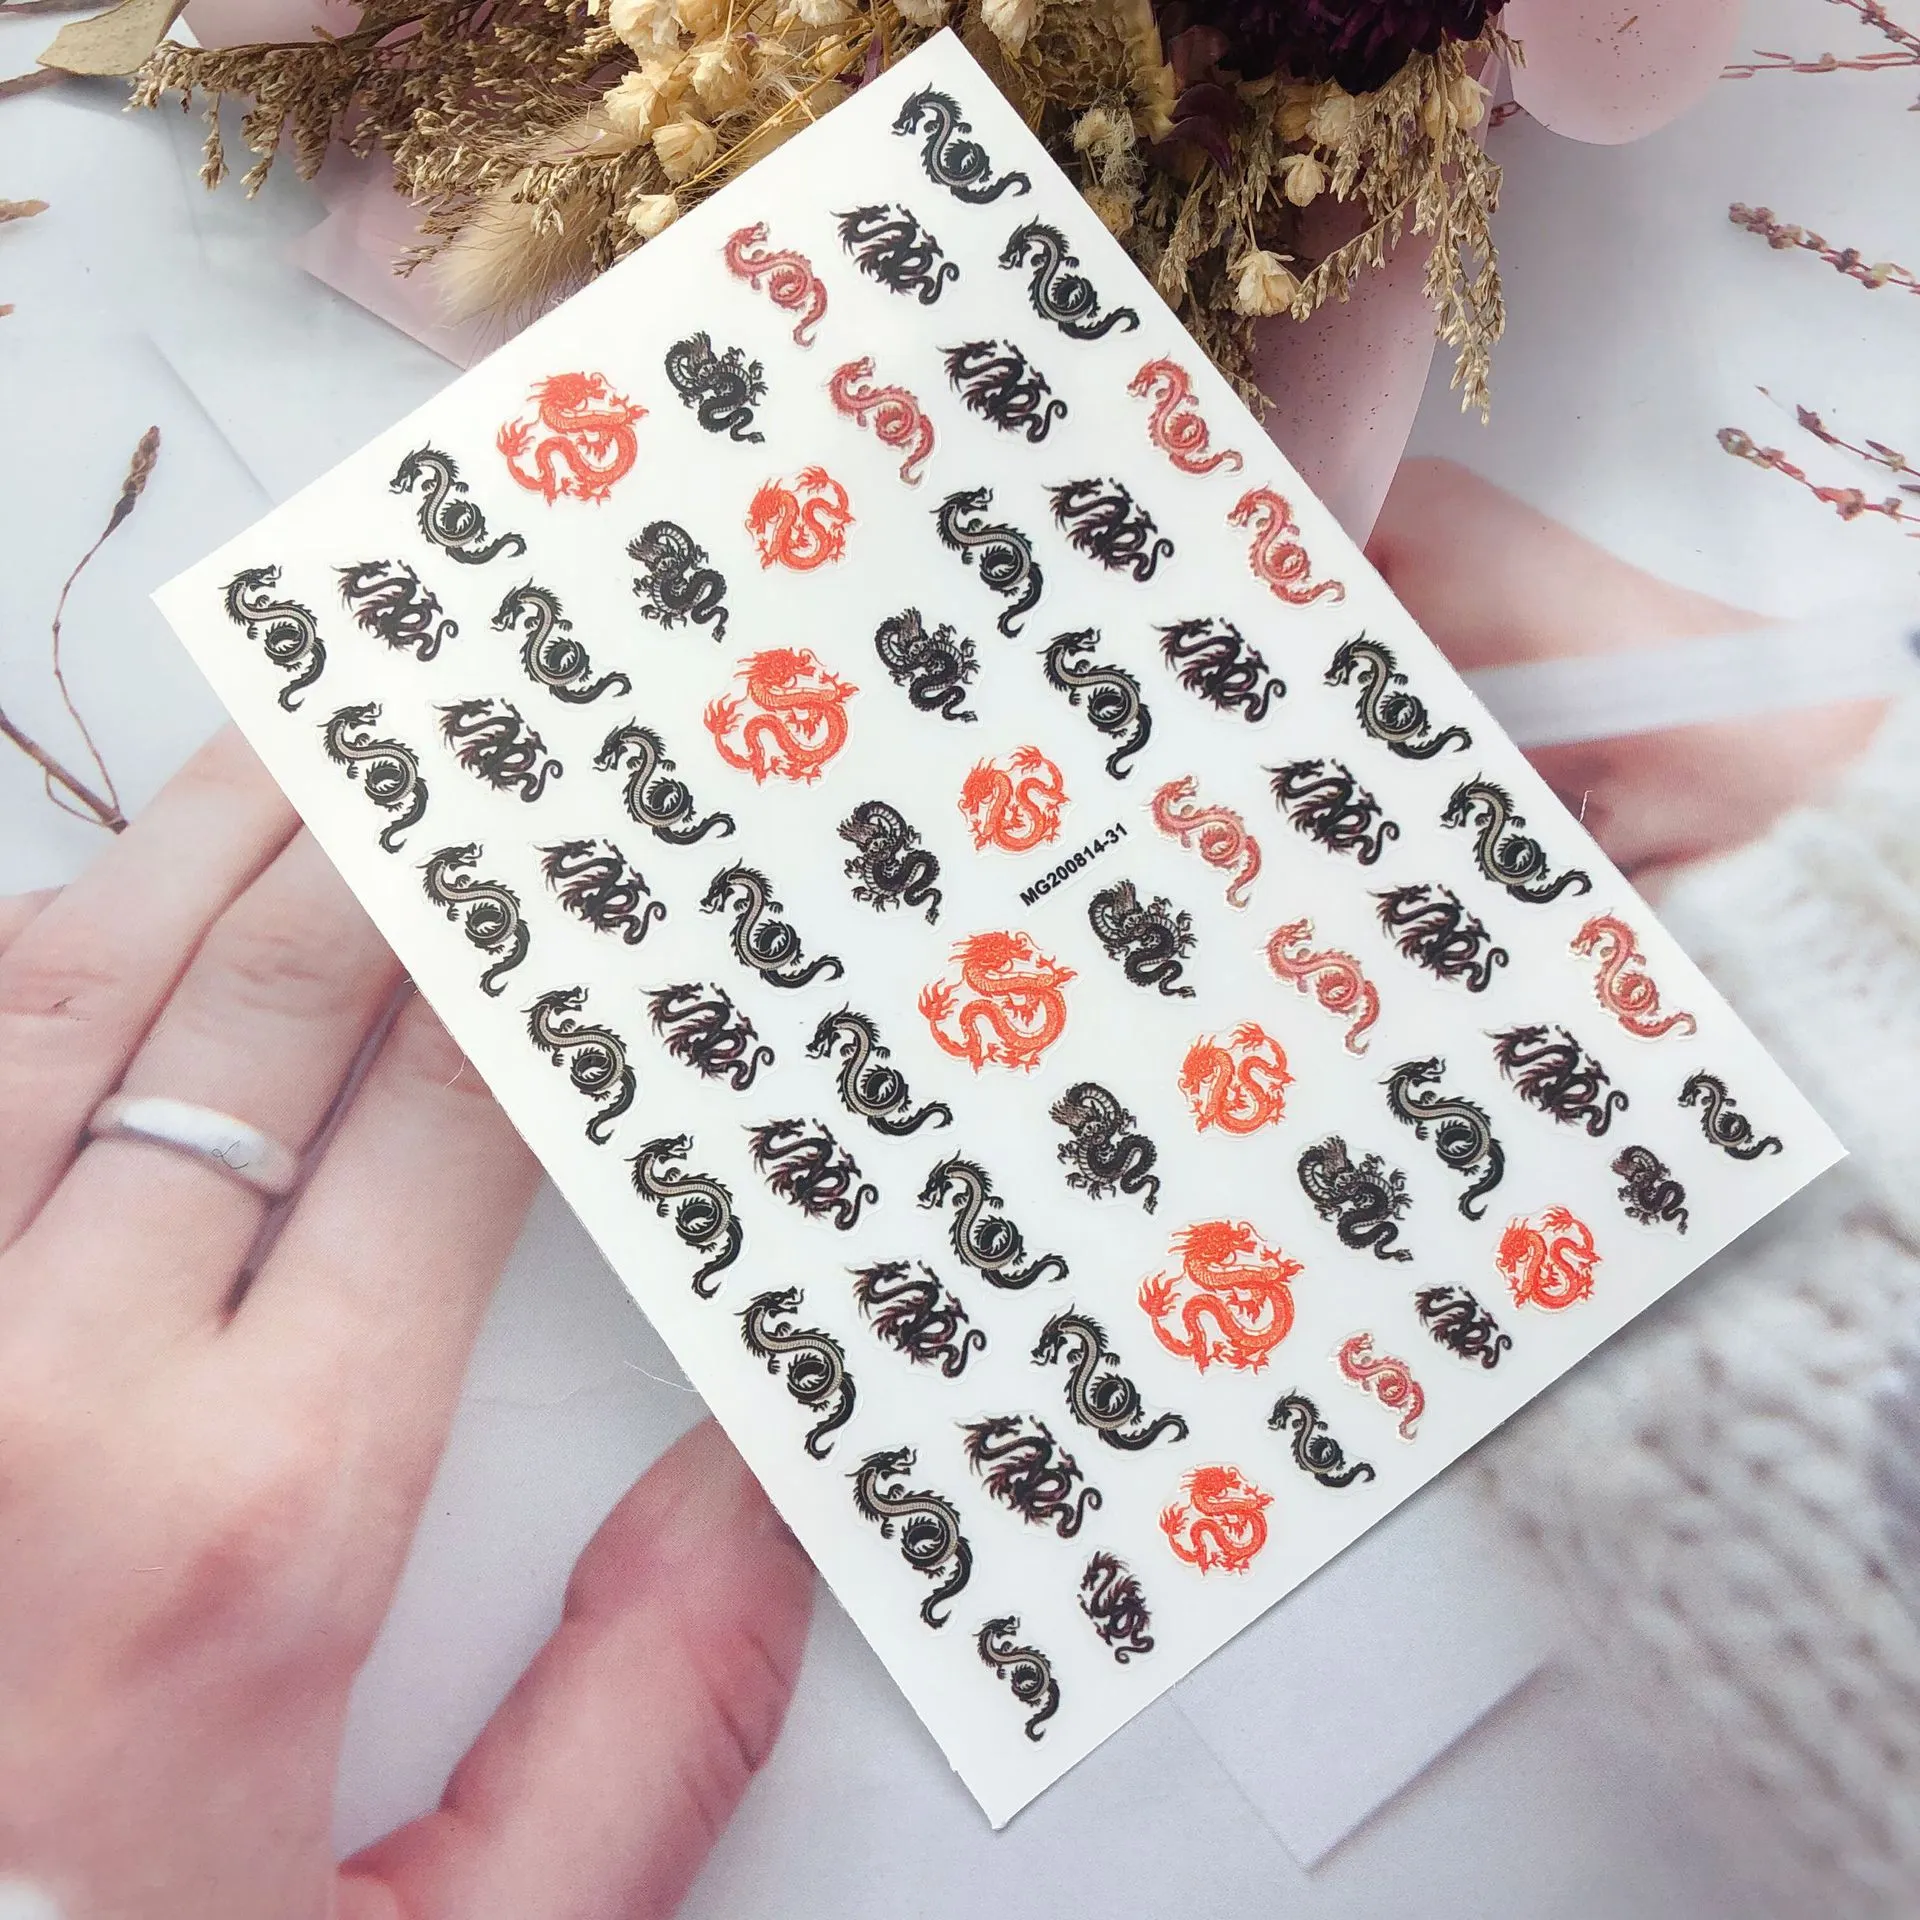 Nail Art Stickers Self-Adhesive DIY Stylish Nail Wraps Full Cover Sticker  Decal☆ | eBay